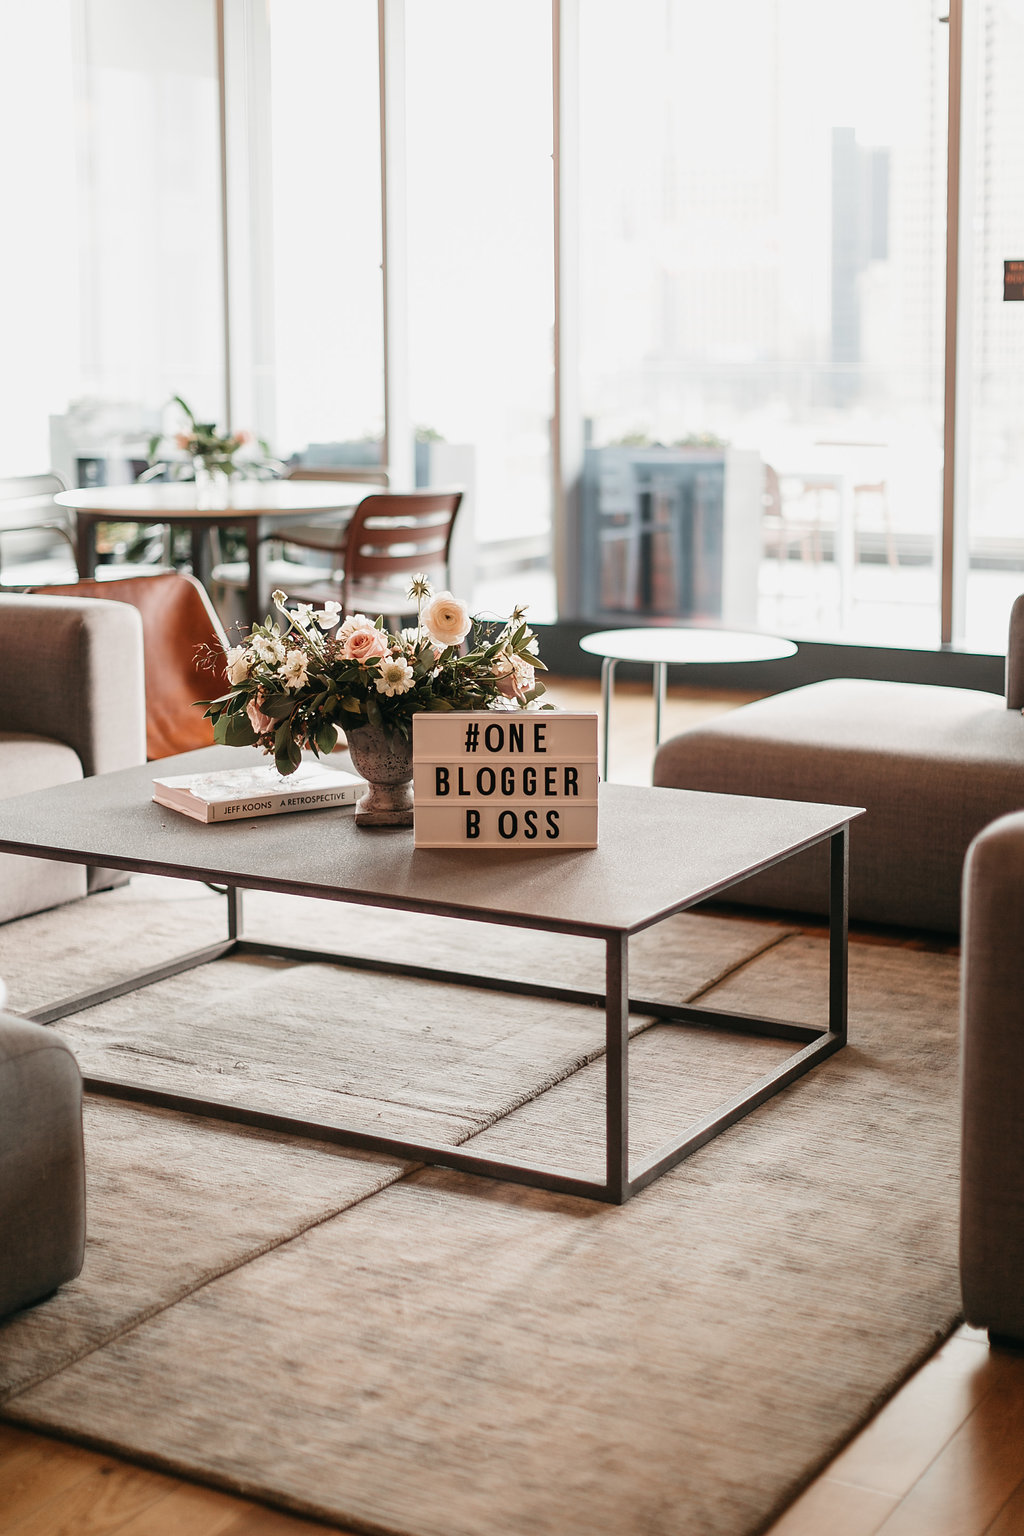 blogger boss workshop spring 2018 at WeWork in Uptown Dallas